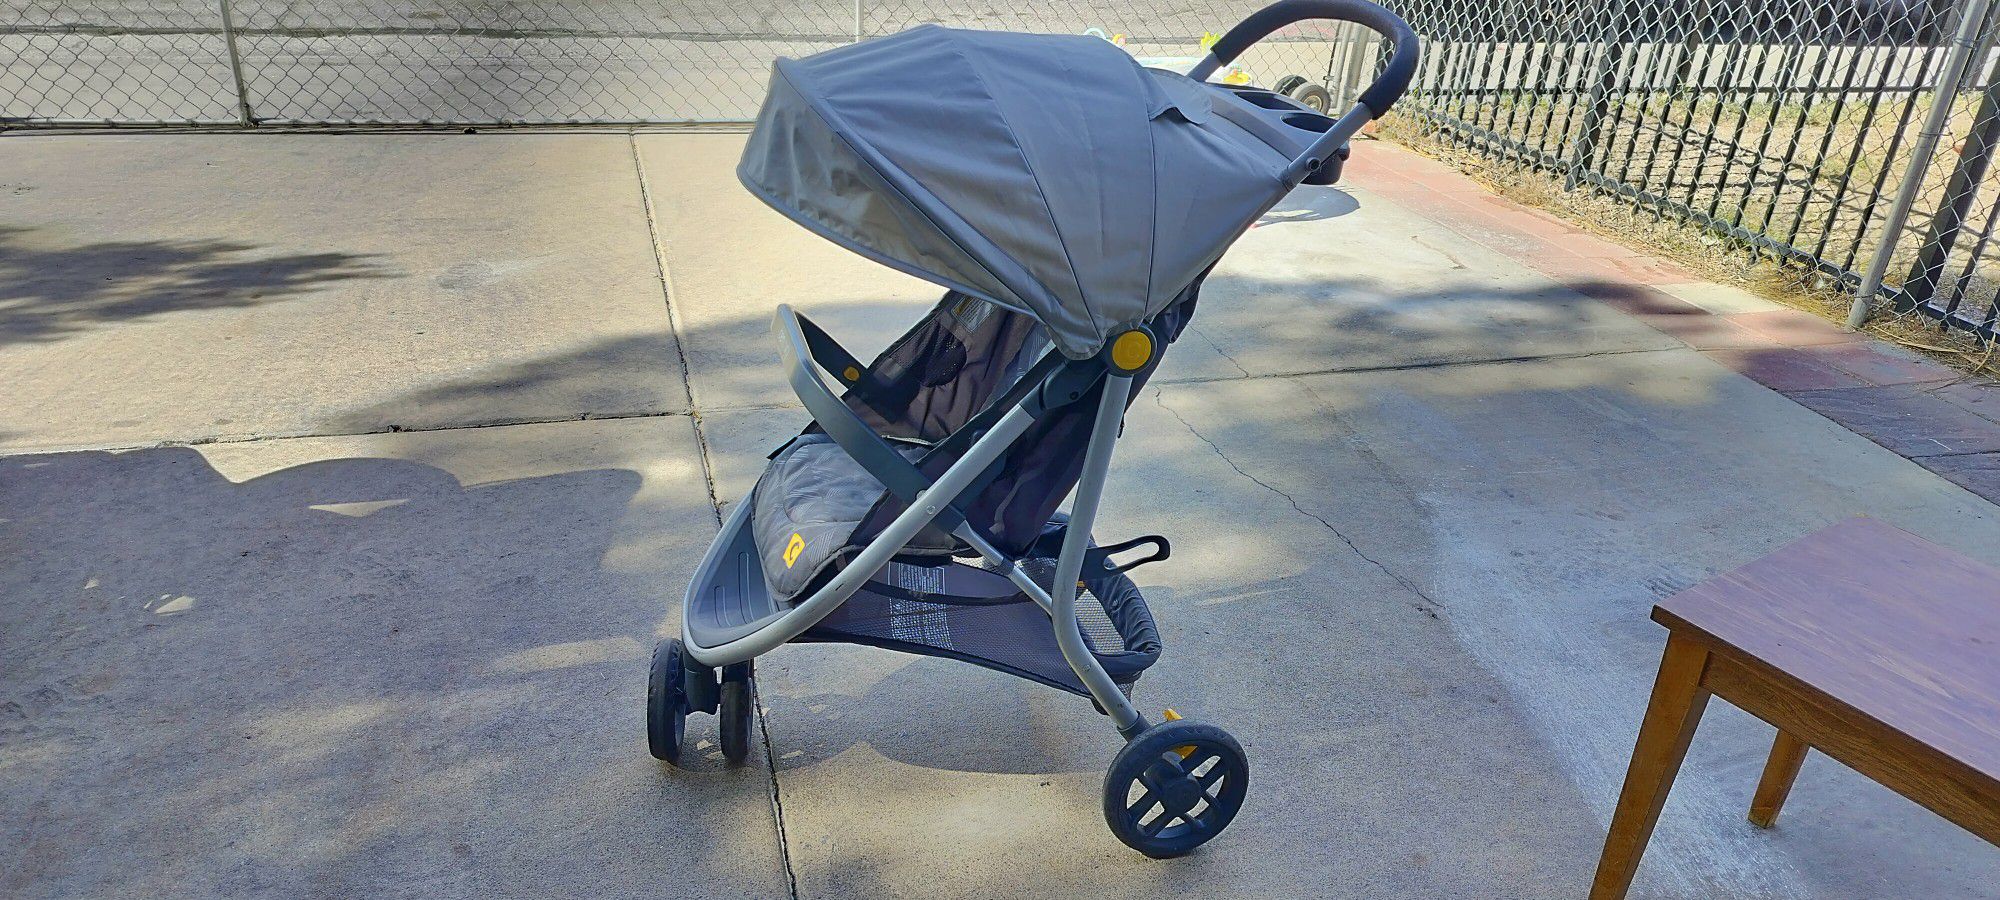 Lightweight Stroller $45 Pick Up Only Bonanza and Lamb 